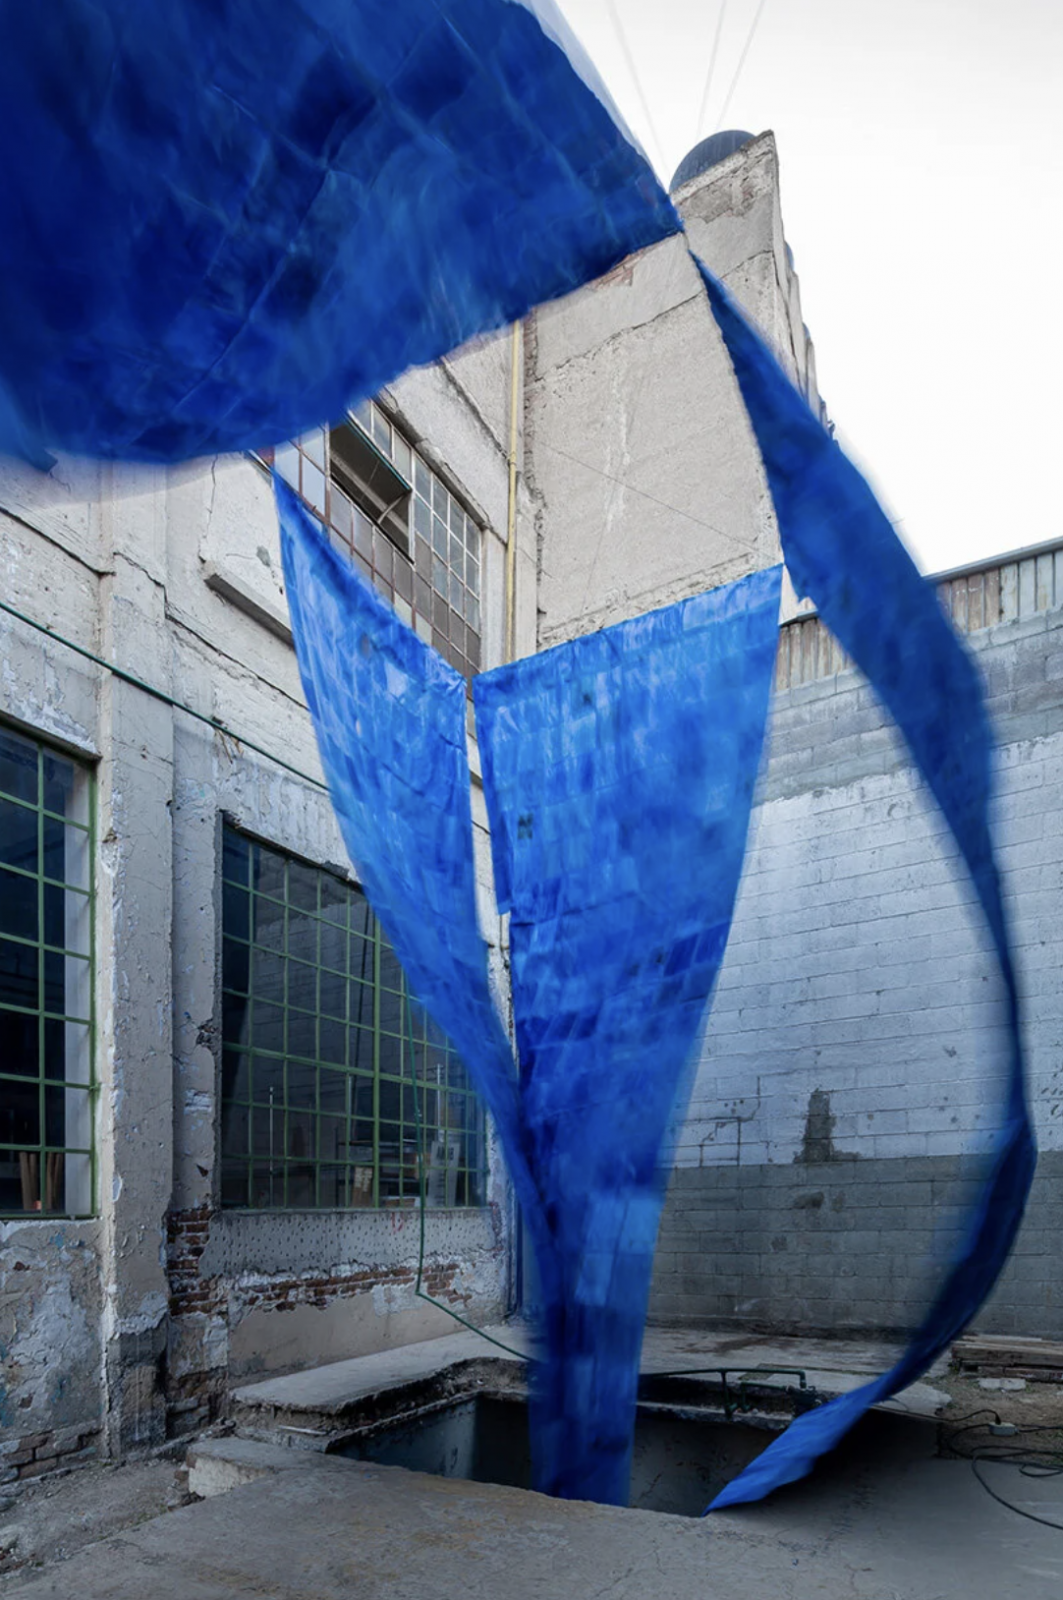 Architecture Firm PALMA's Blue Paper Installation is Made of 1.200 Recycled Papers